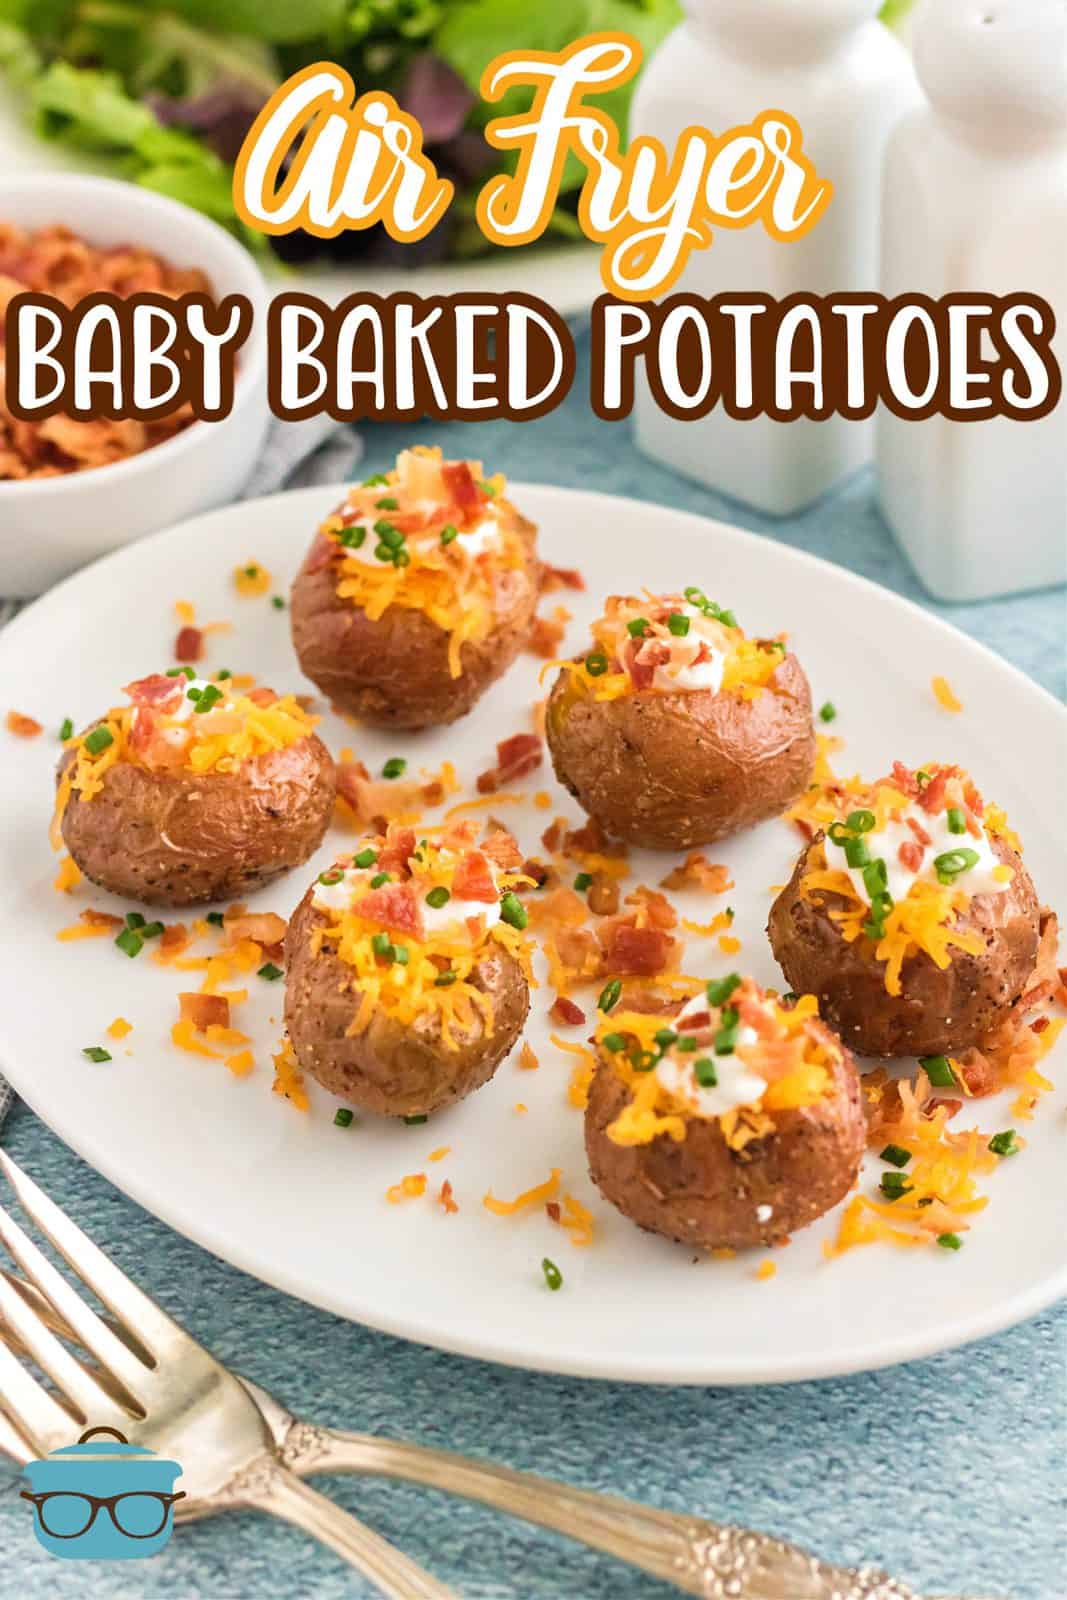 Pinterest image with garnished Air Fryer Baby Baked Potatoes on it.